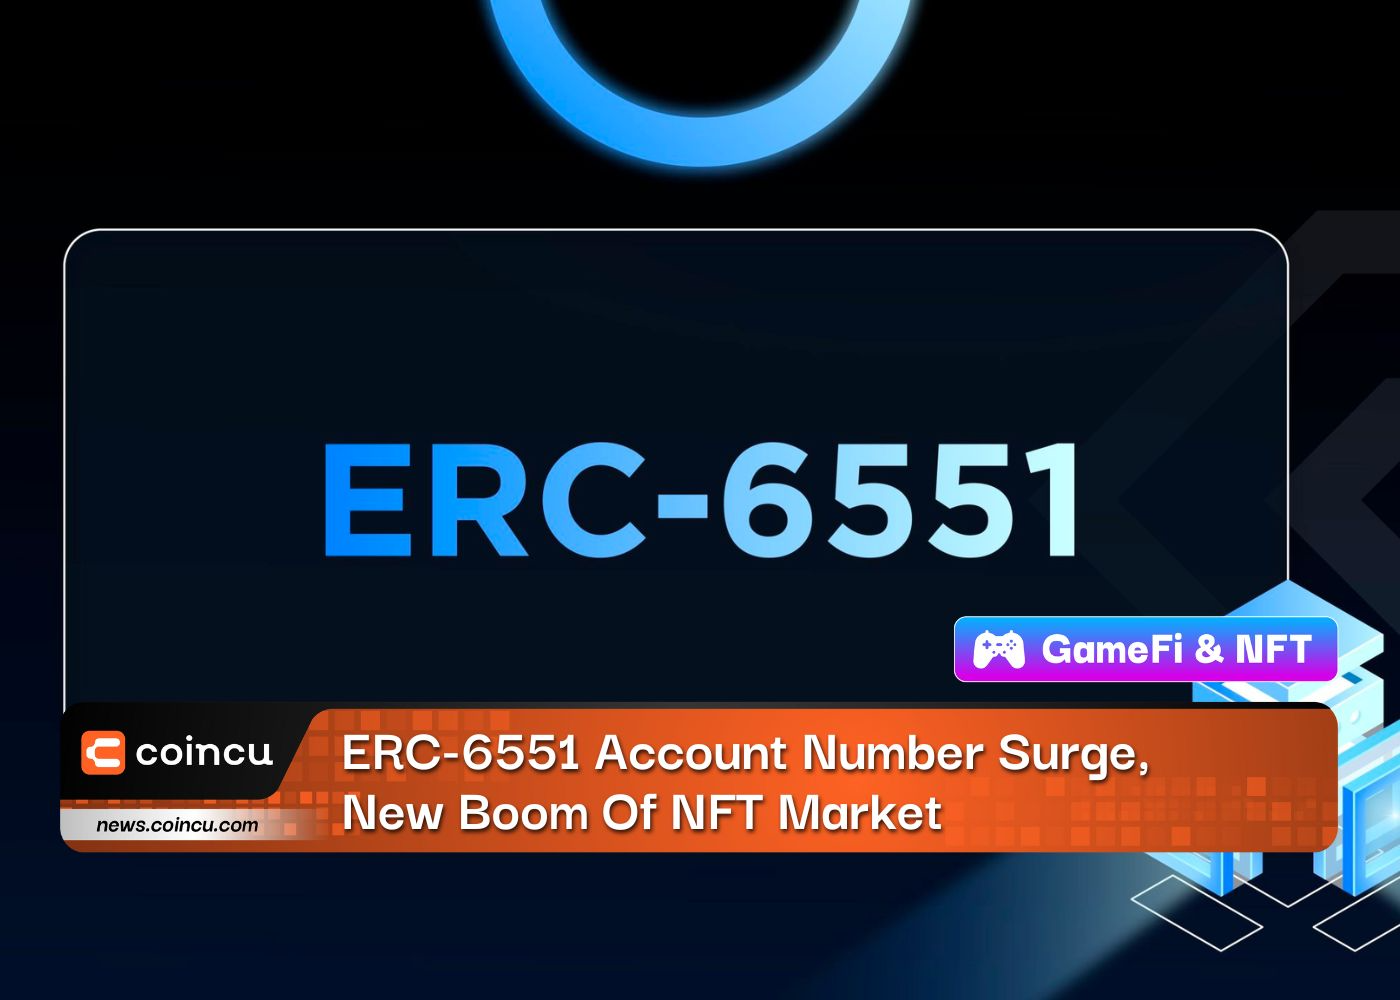 ERC-6551 Account Number Surge, New Boom Of NFT Market